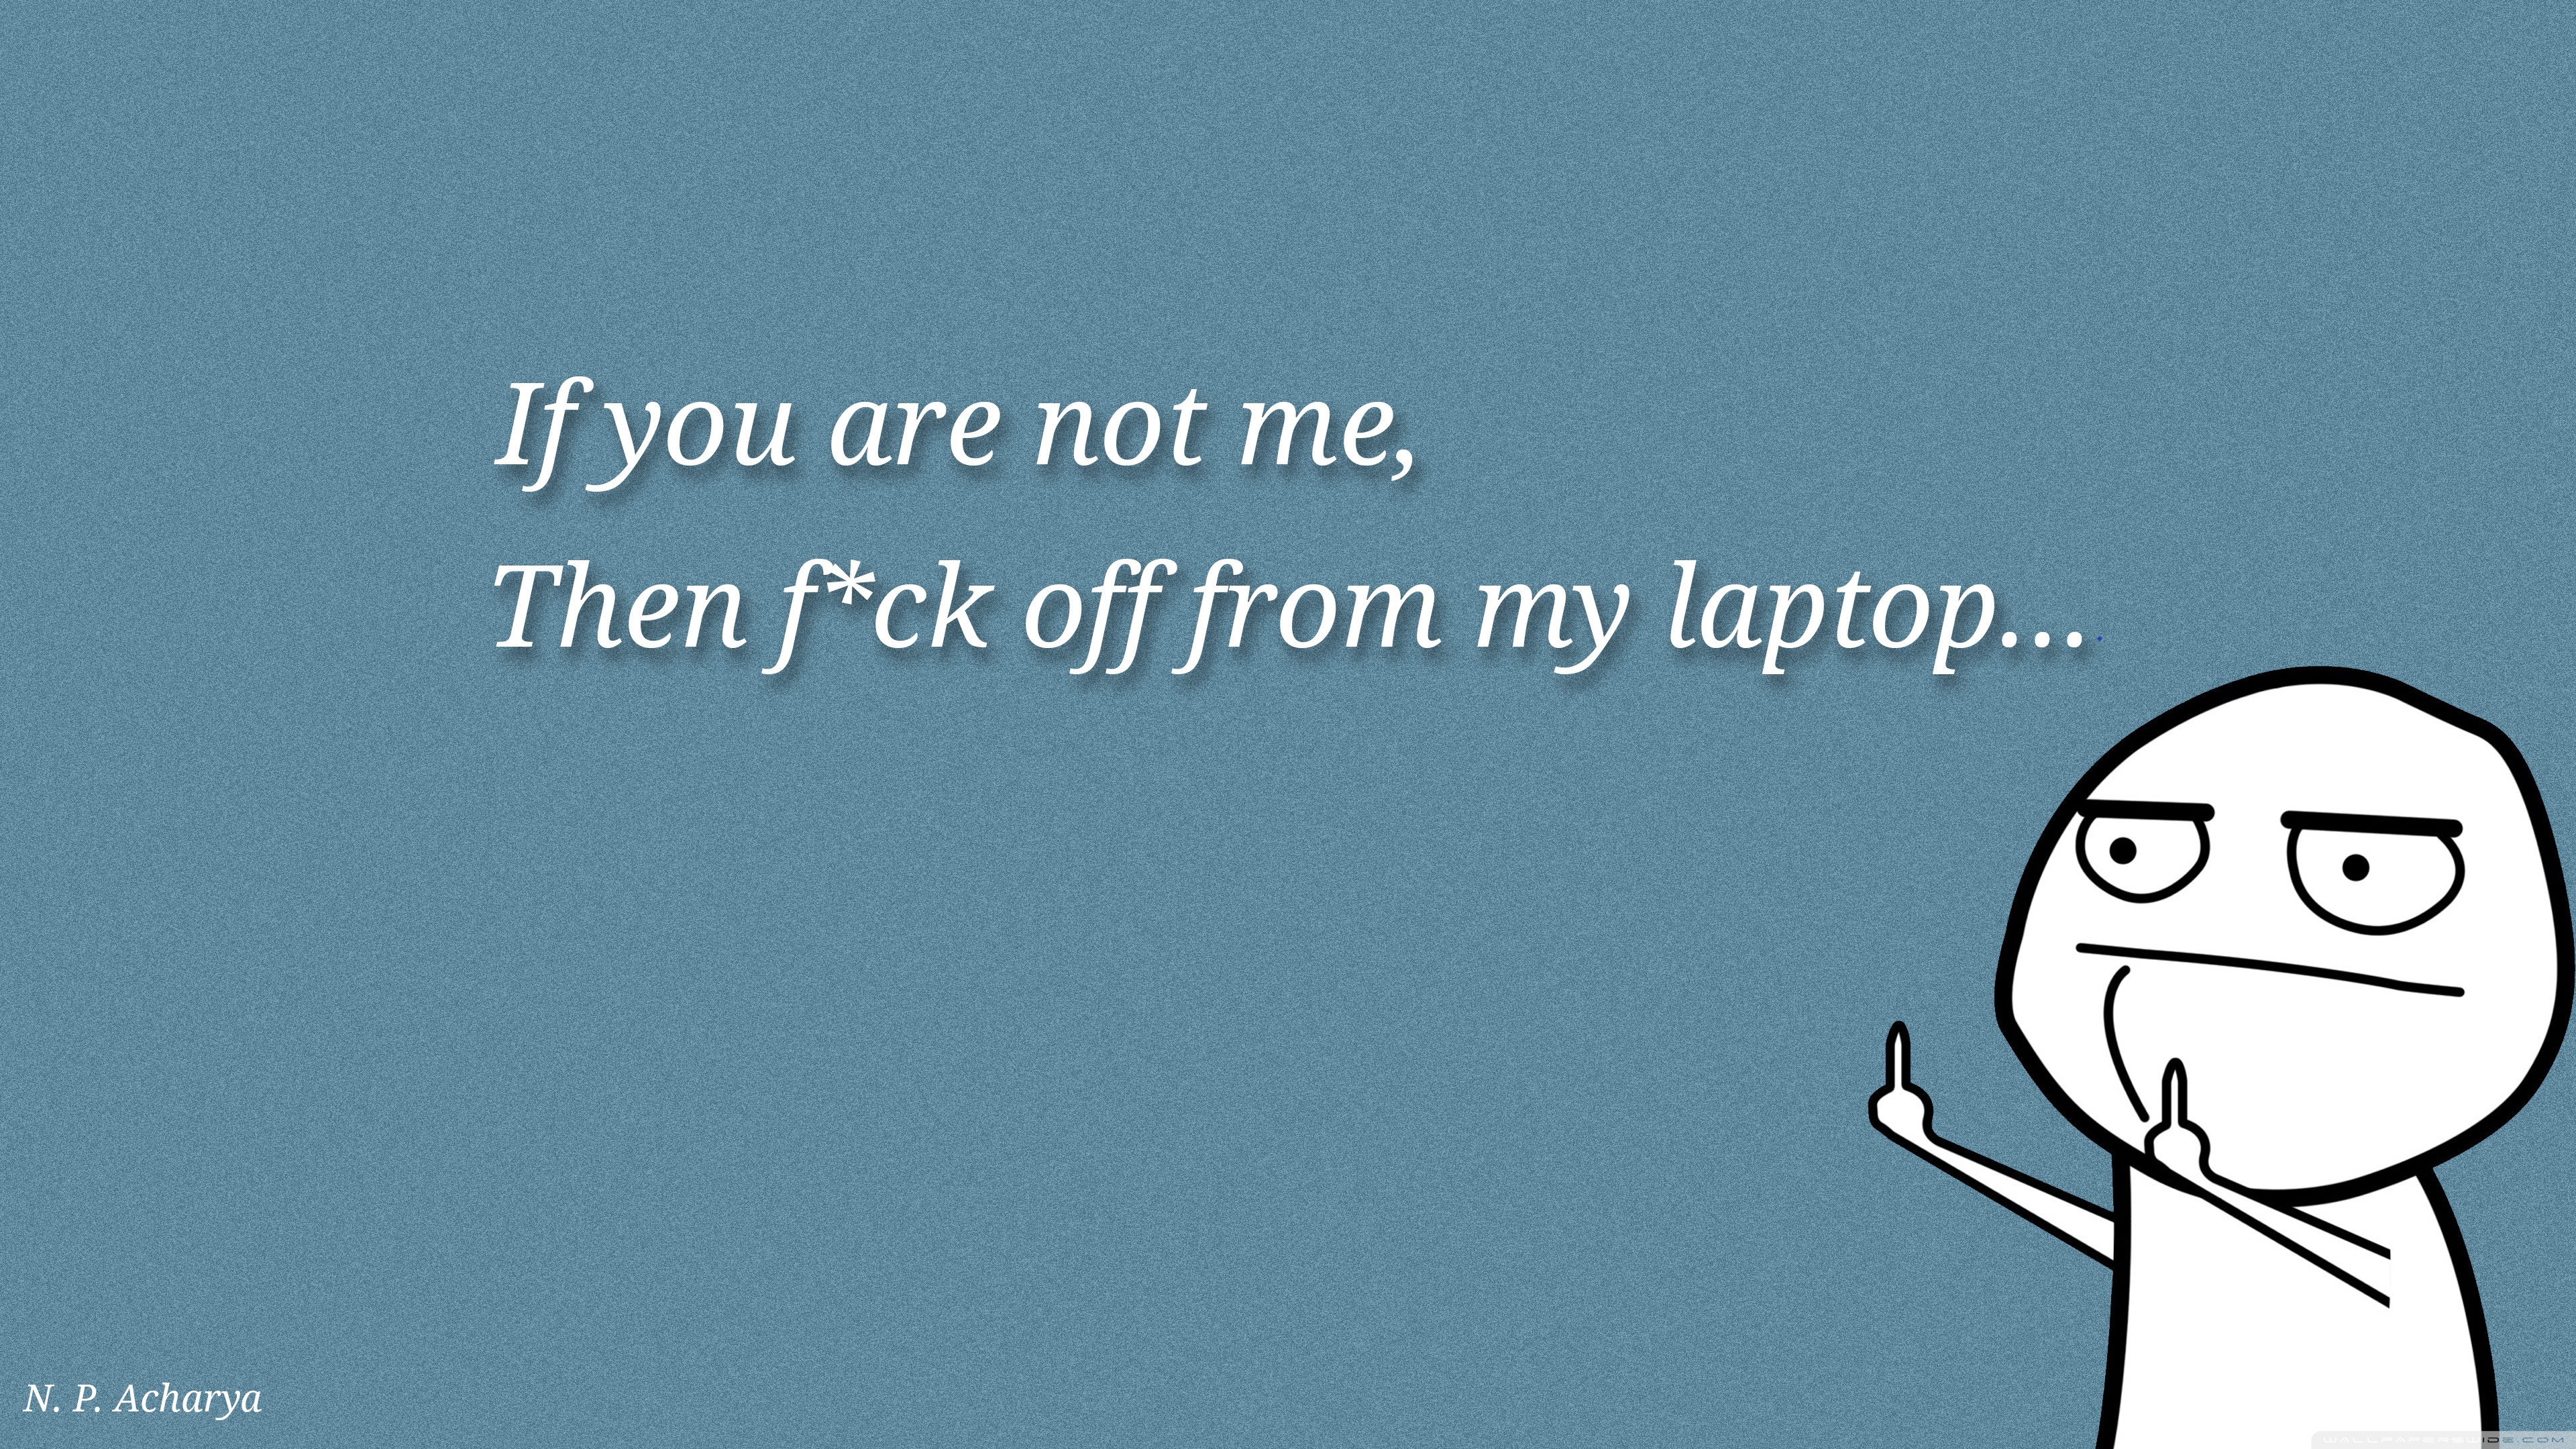 Get Off My Laptop Wallpapers